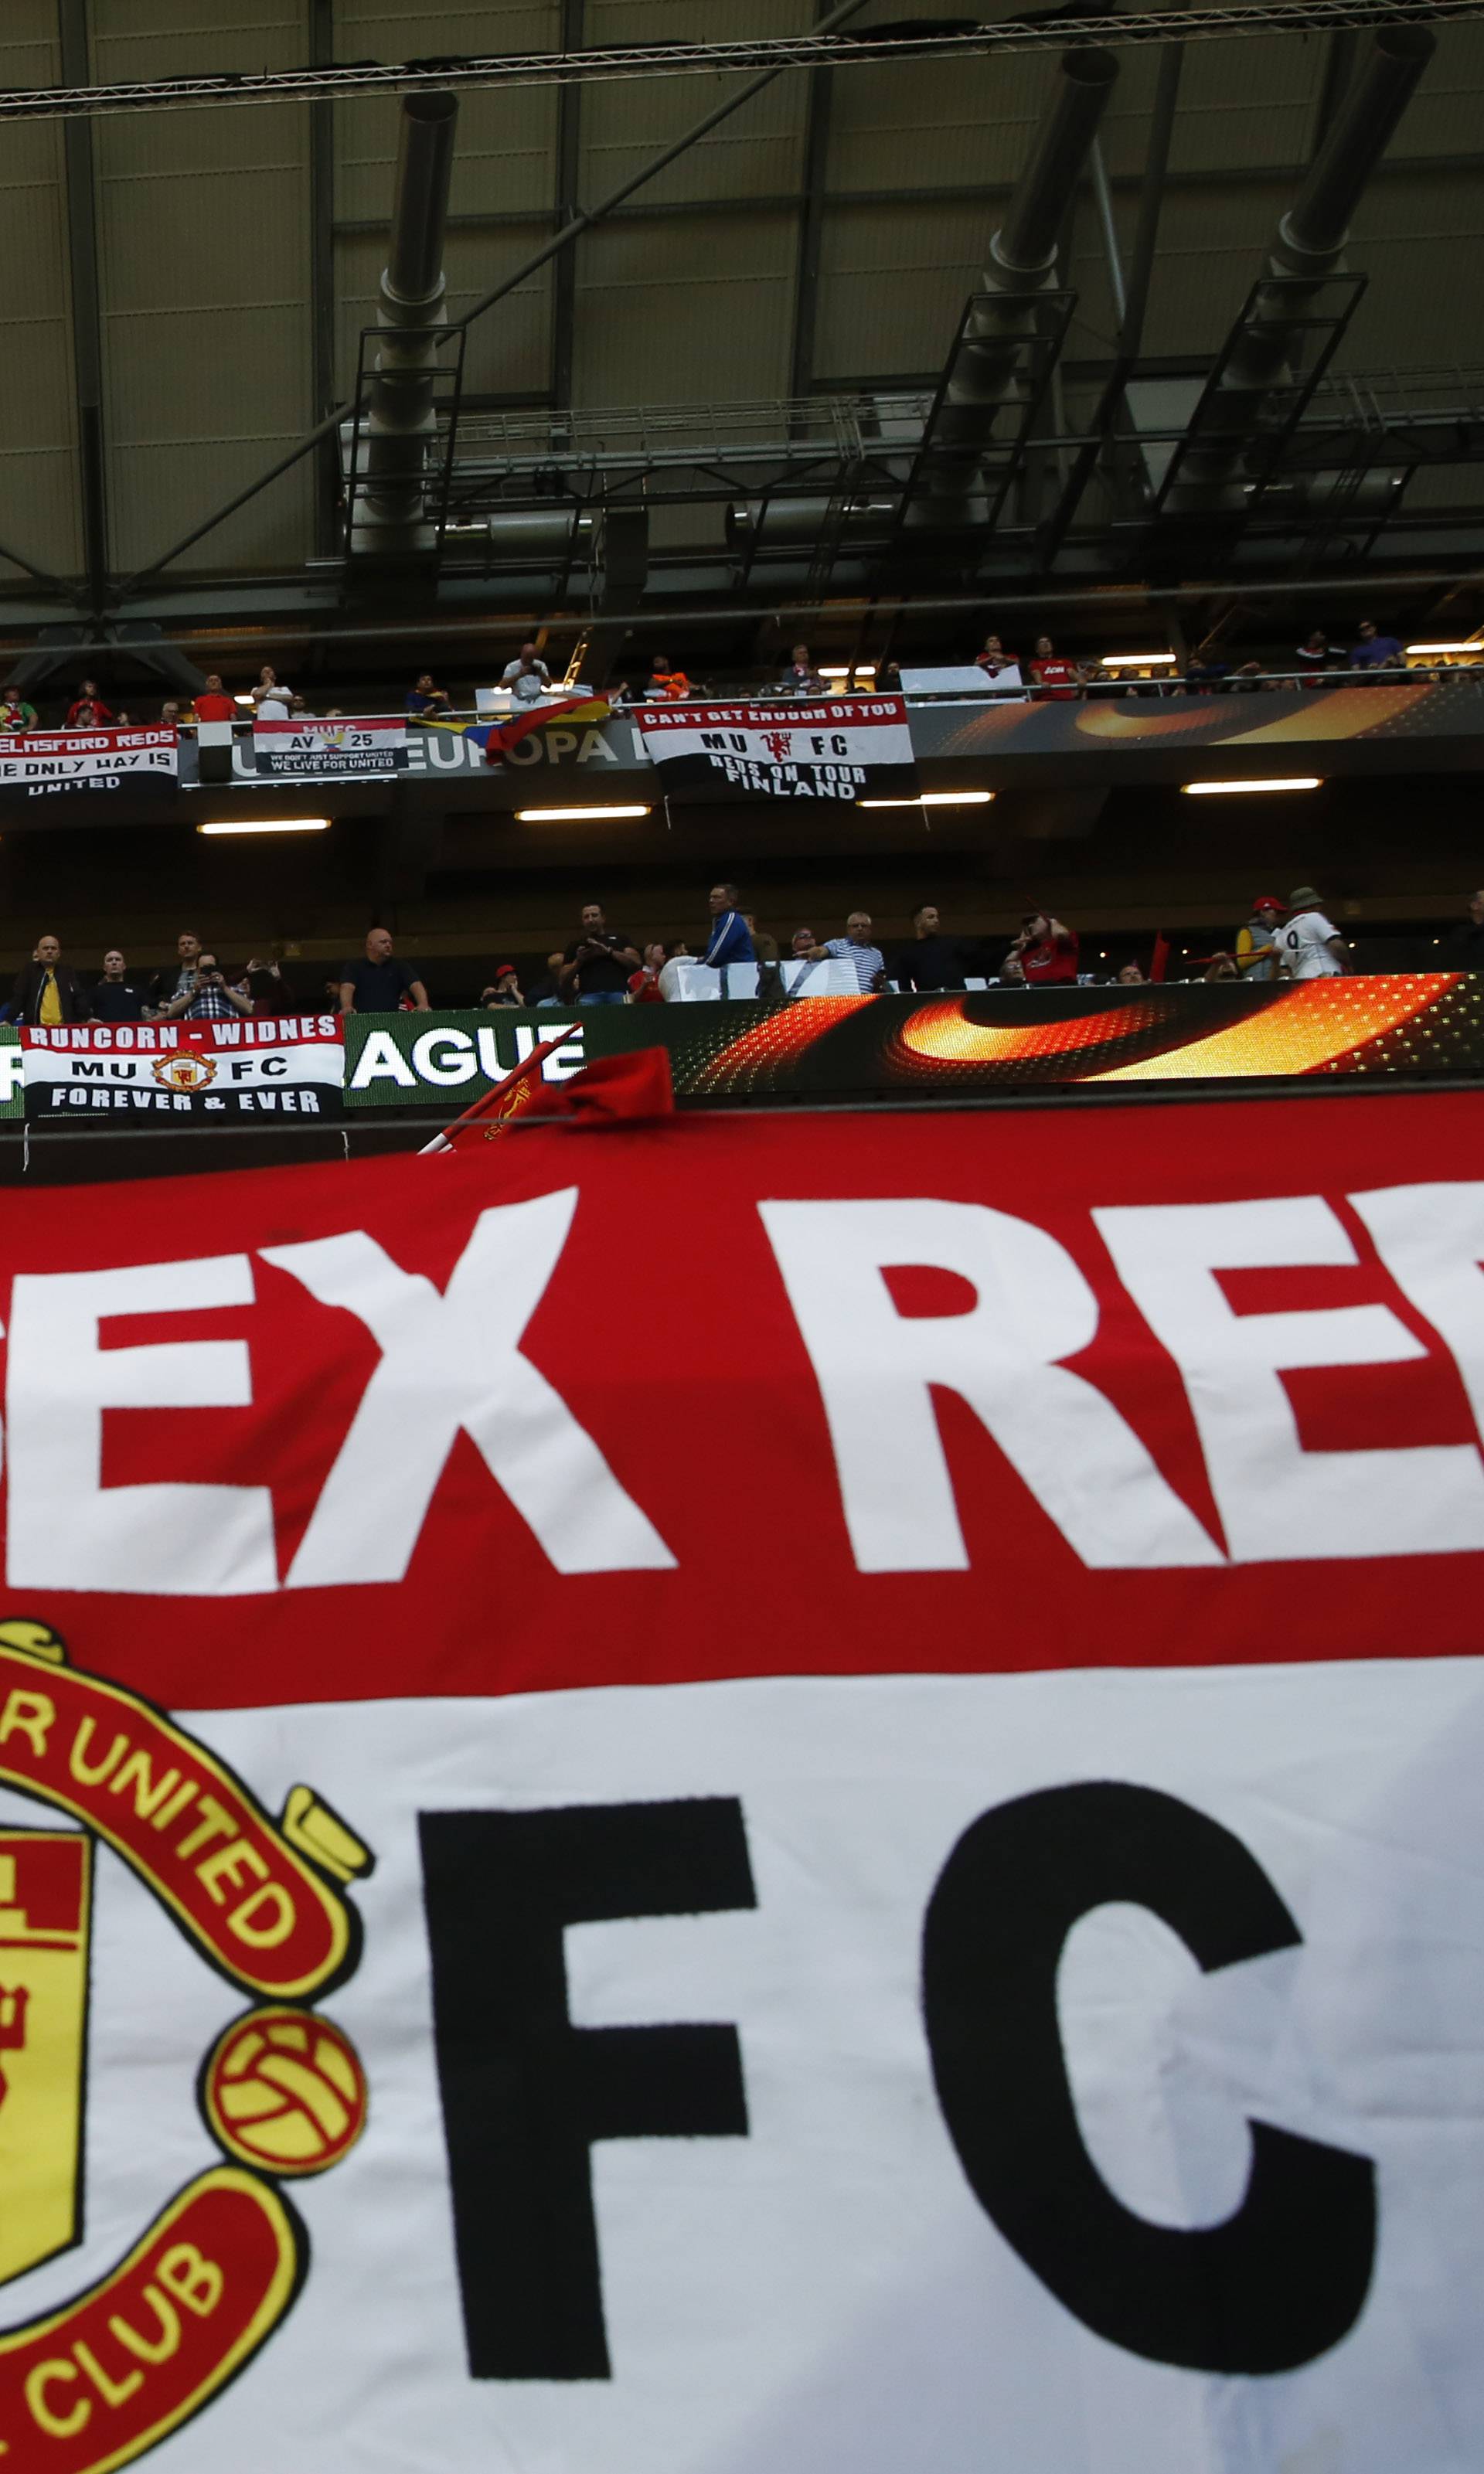 Manchester United fans with a flag inside the stadium before the match